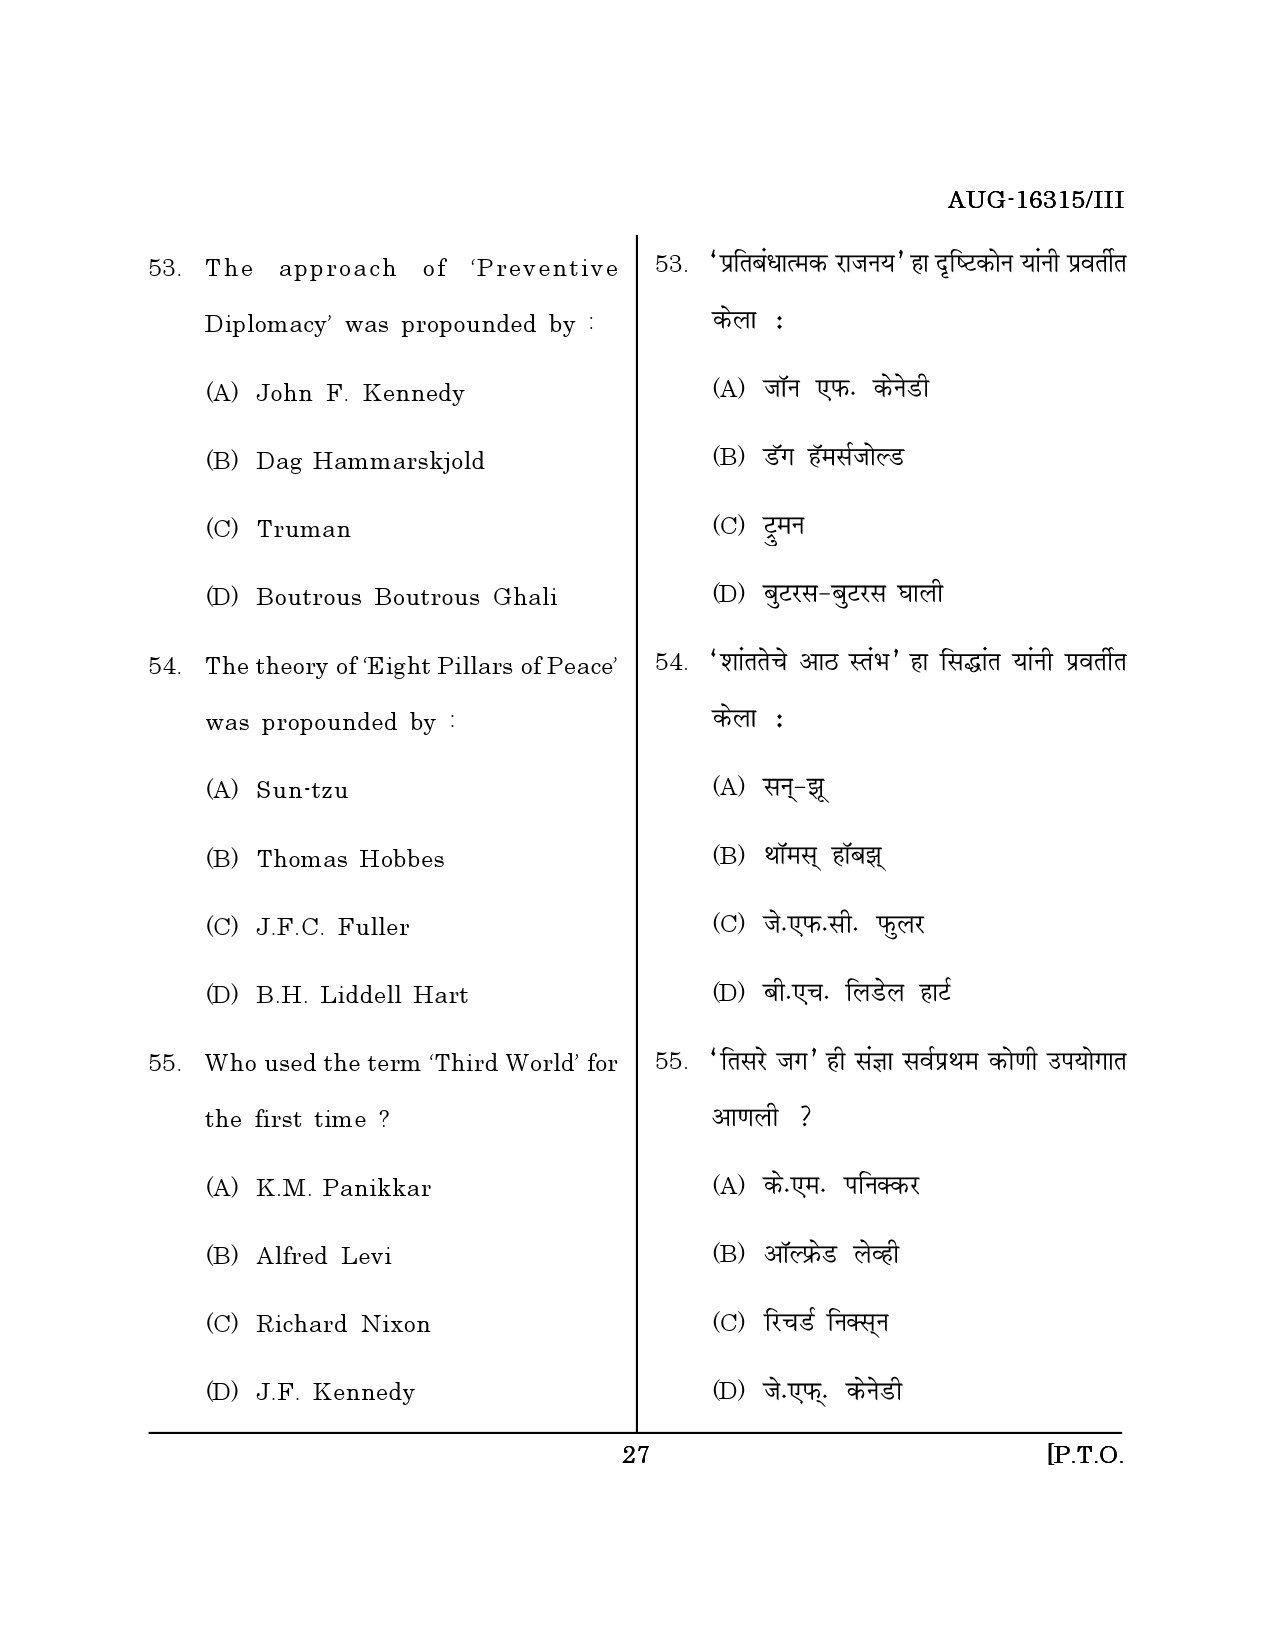 Maharashtra SET Defence and Strategic Studies Question Paper III August 2015 26